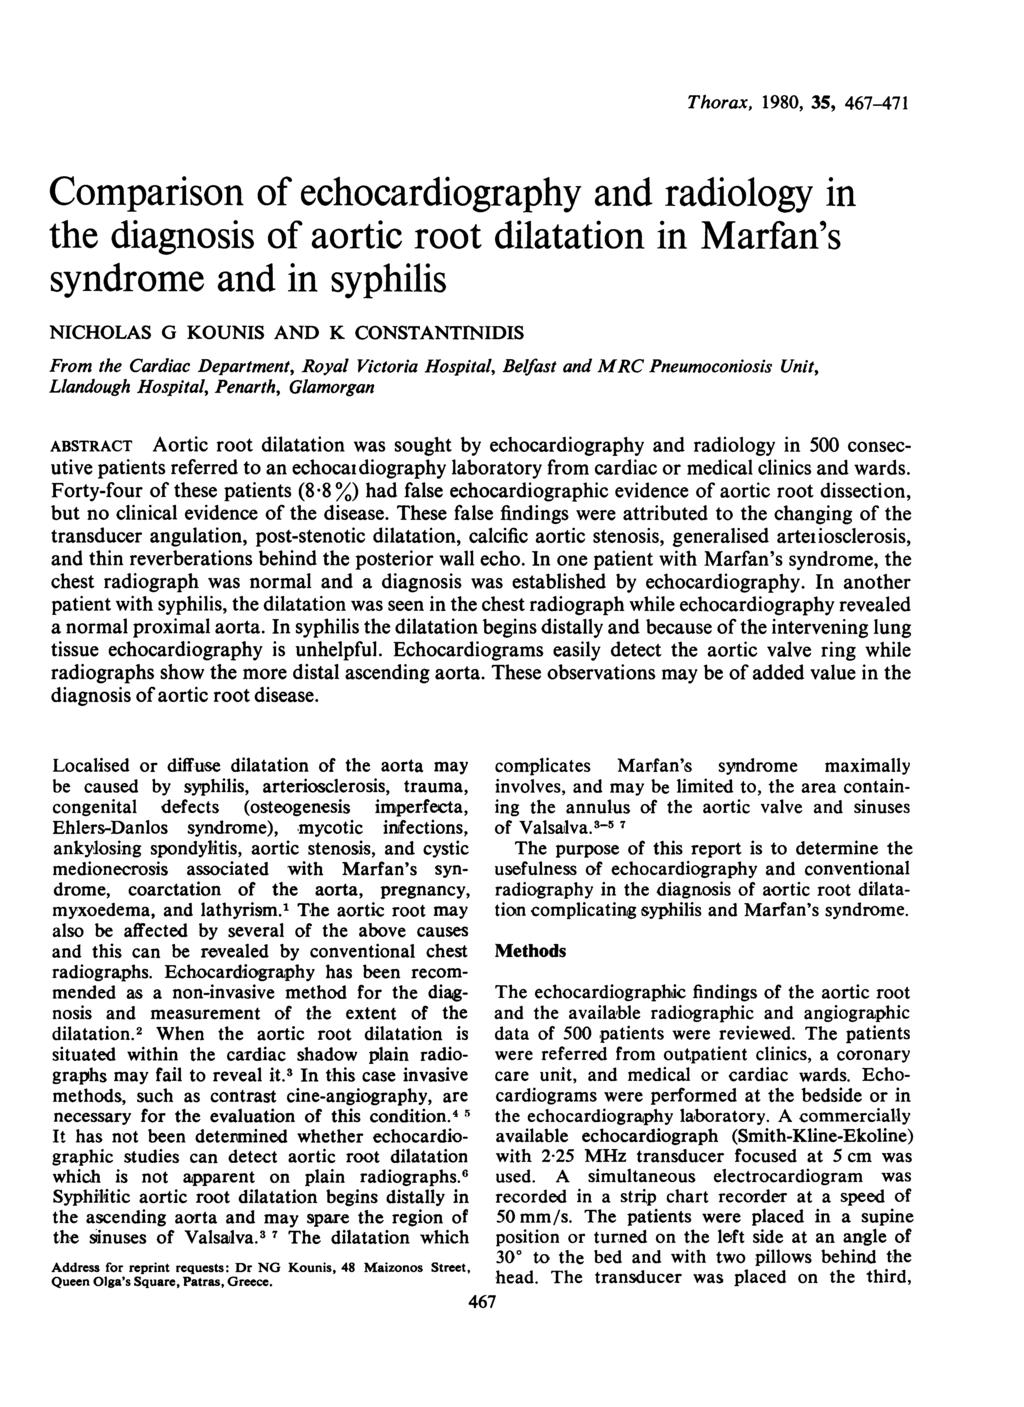 Thorax, 1980, 35, 467-471 Comparison of echocardiography and radiology in the diagnosis of aortic root dilatation in Marfan's syndrome and in syphilis NICHOLAS G KOUNIS AND K CONSTANTINIDIS From the